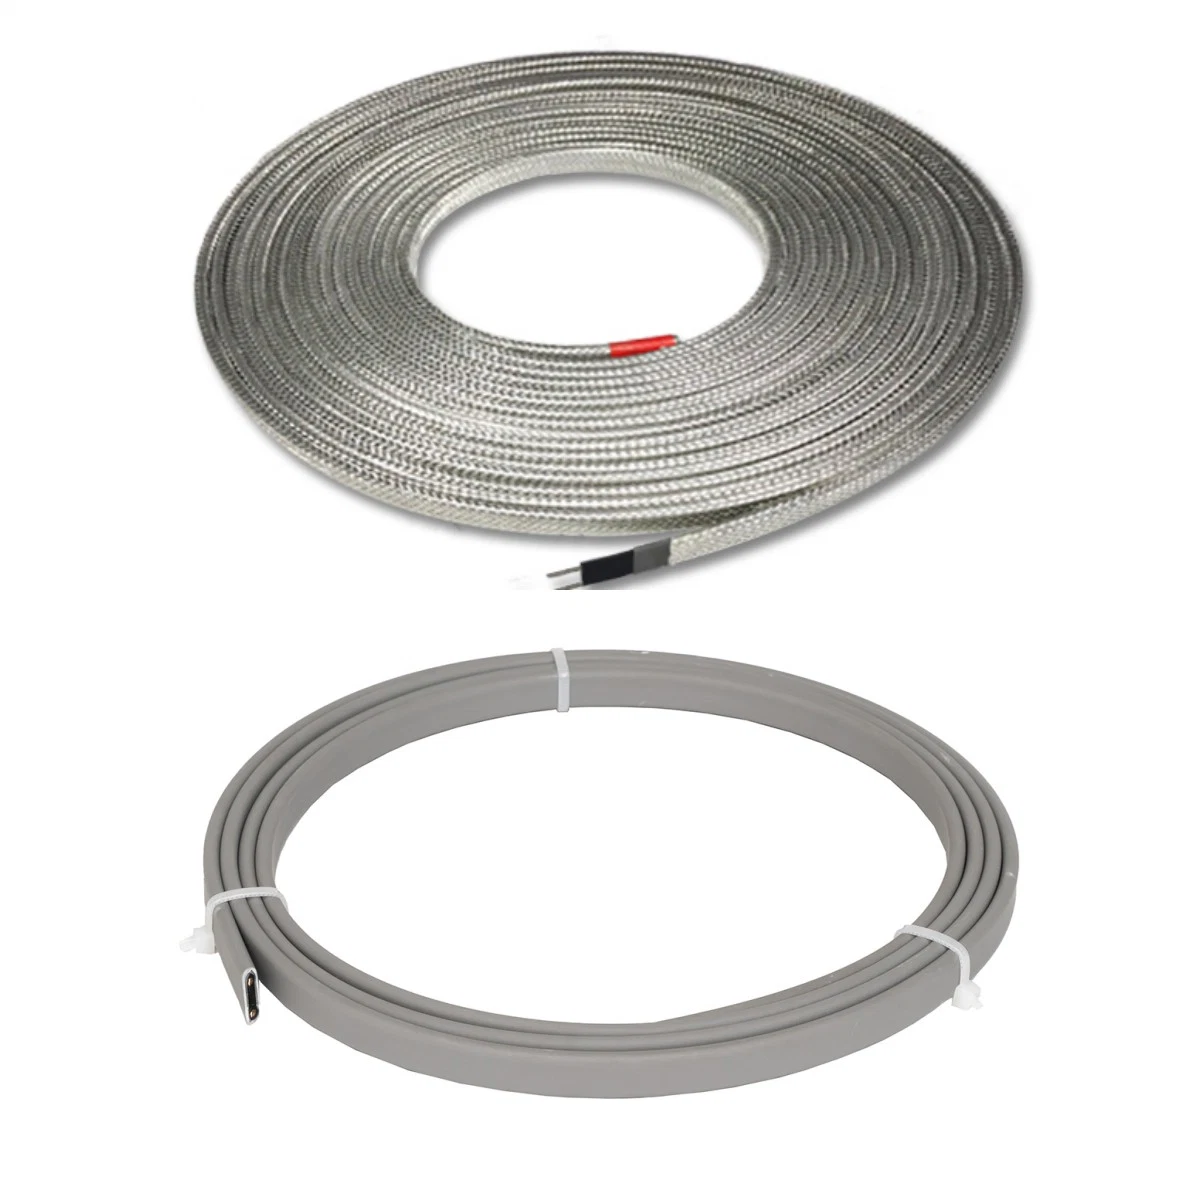 Self-Limiting Heating Cable Is Used to Prevent Water Pipe From Freezing